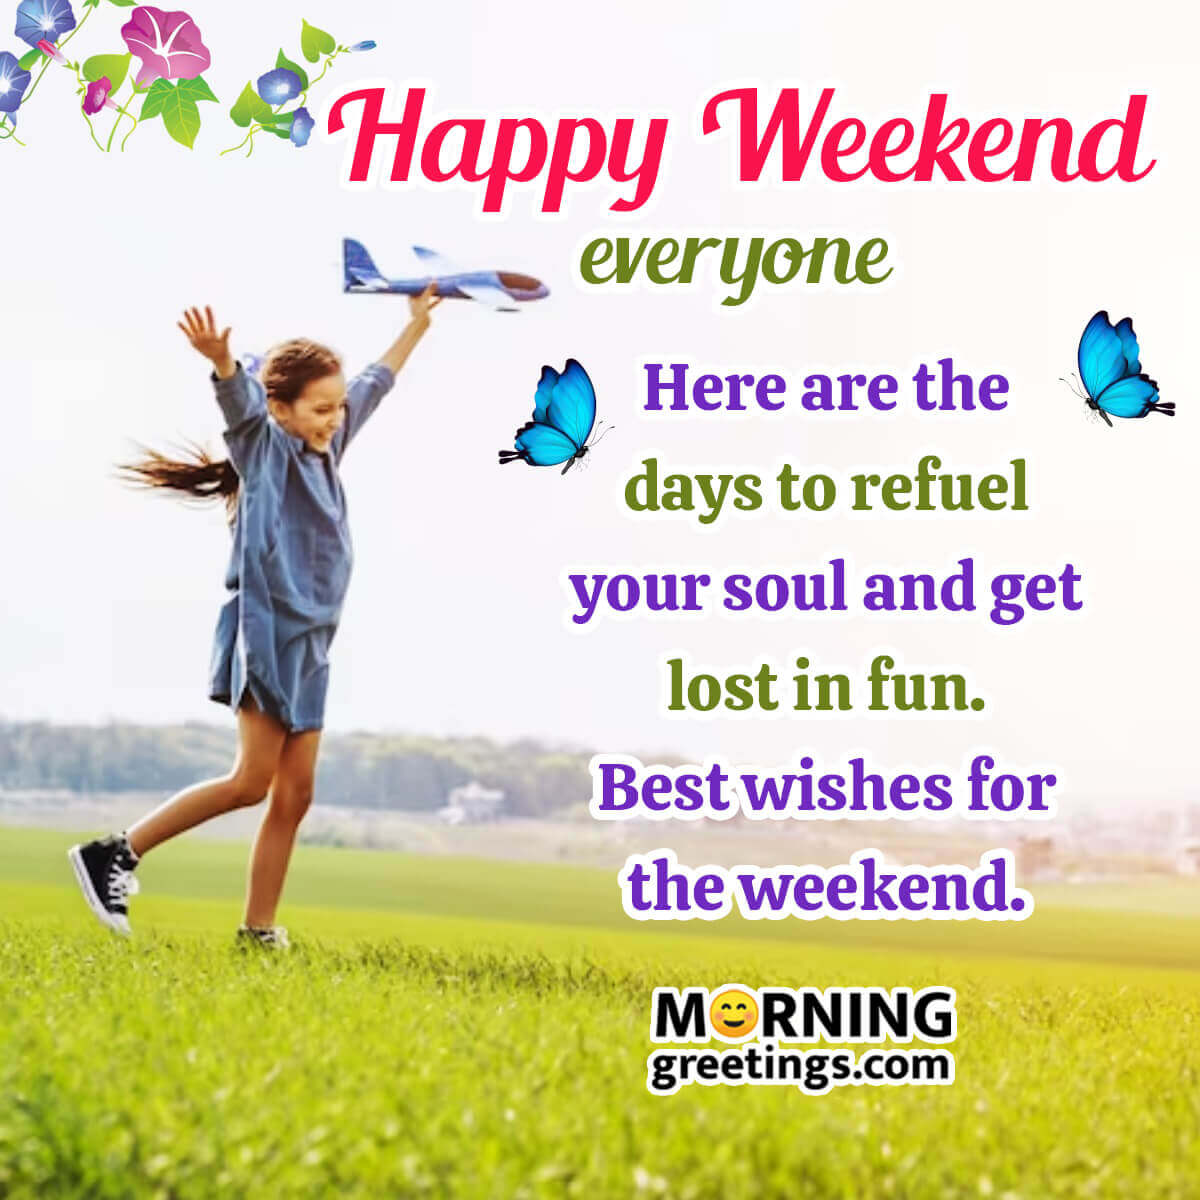 Best Wishes For Happy Weekend Pic